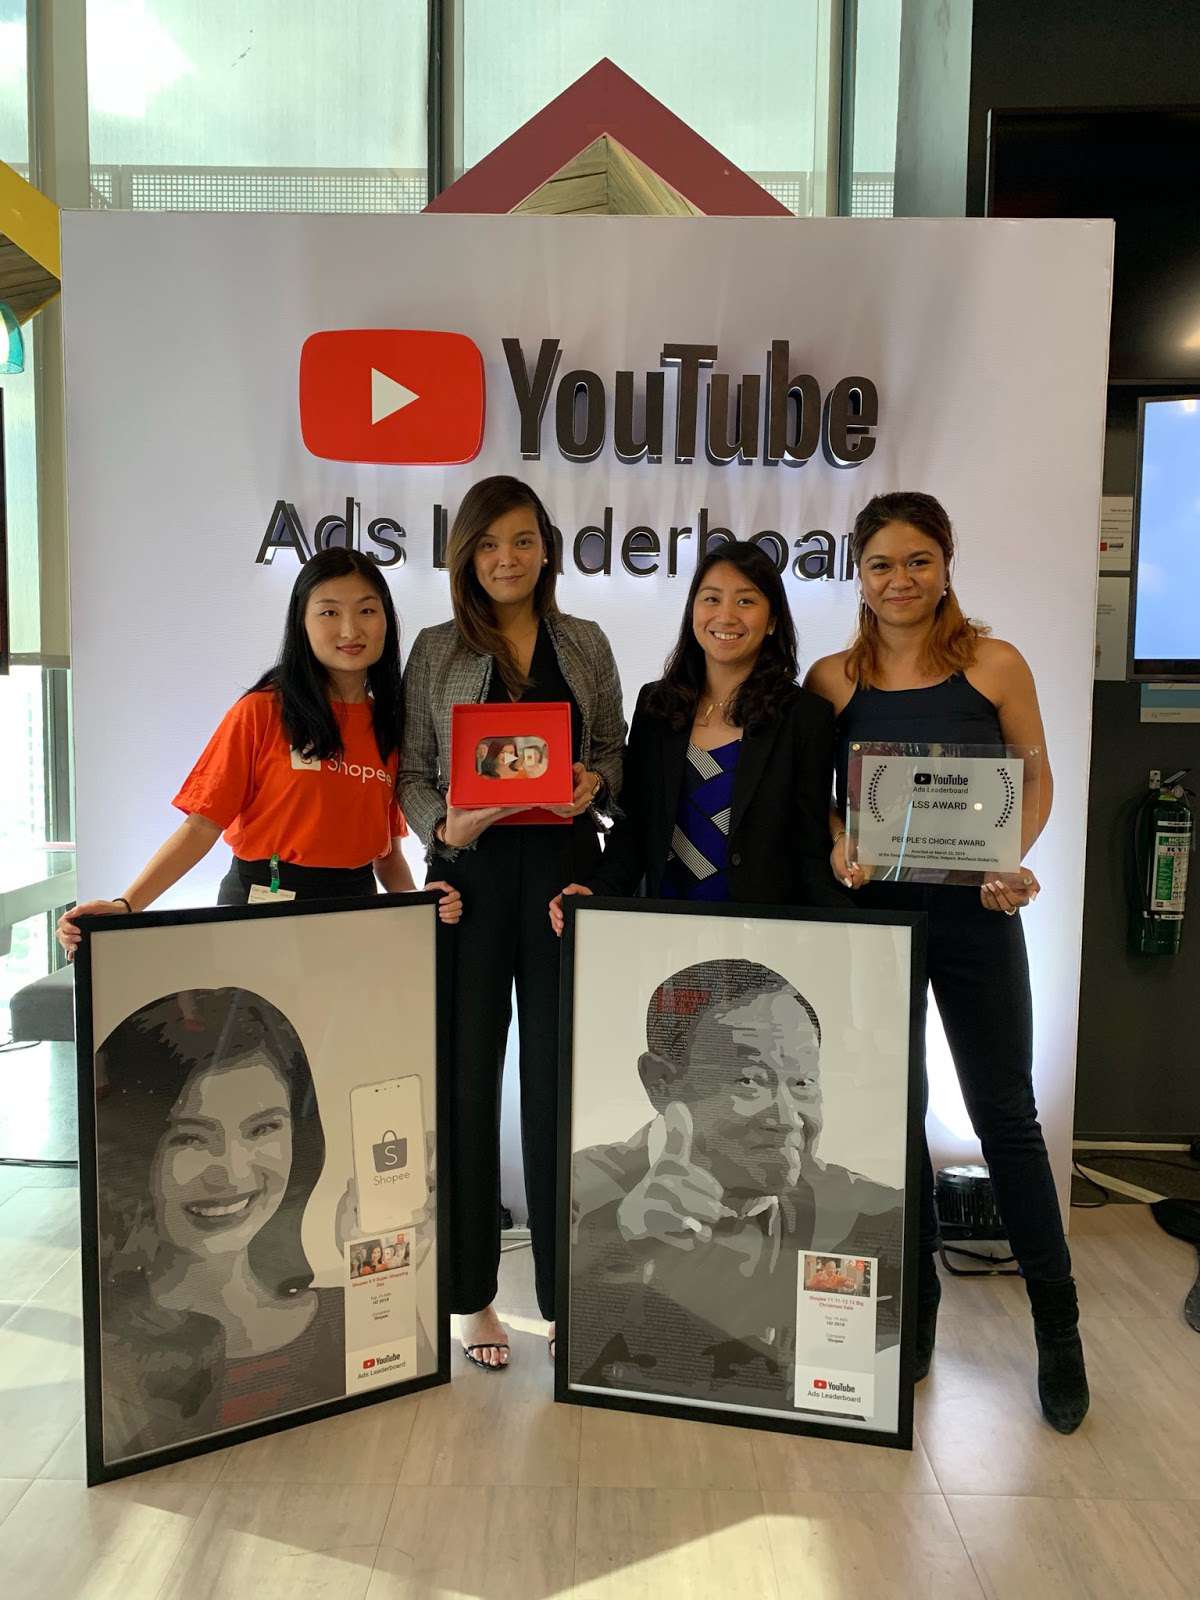 shopee-tops-youtube-ads-leaderboard-in-the-philippines-with-the-viral